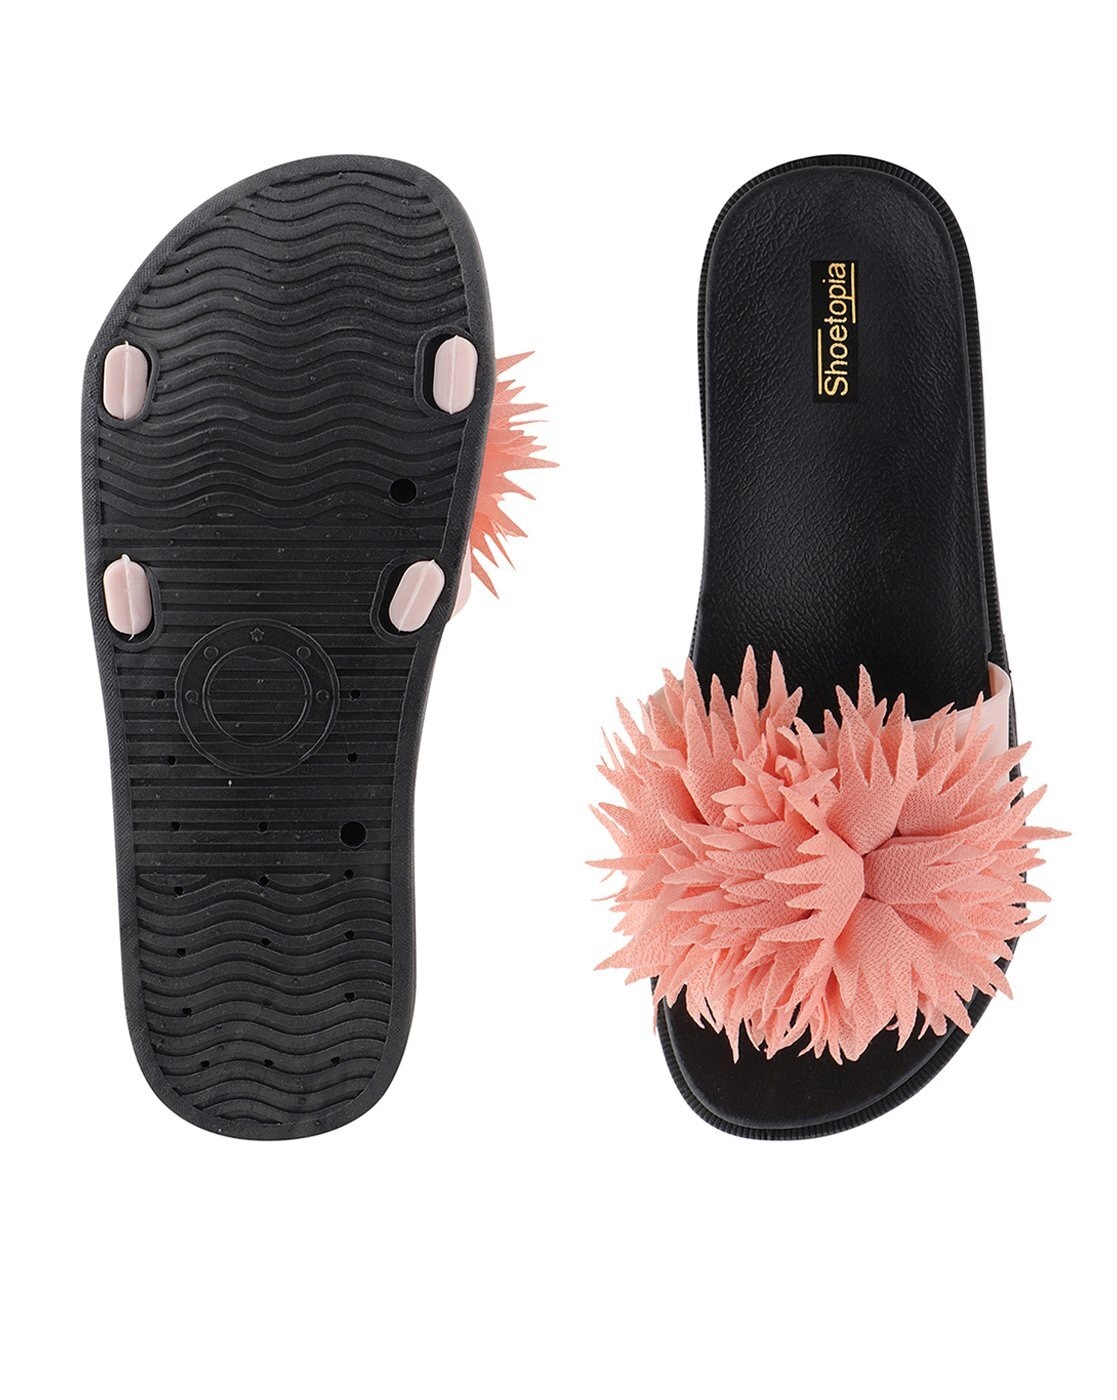 Shoes Girls Shoes Slippers Liya's slippers with rubber sole #685 Pink flower in reddish brown 